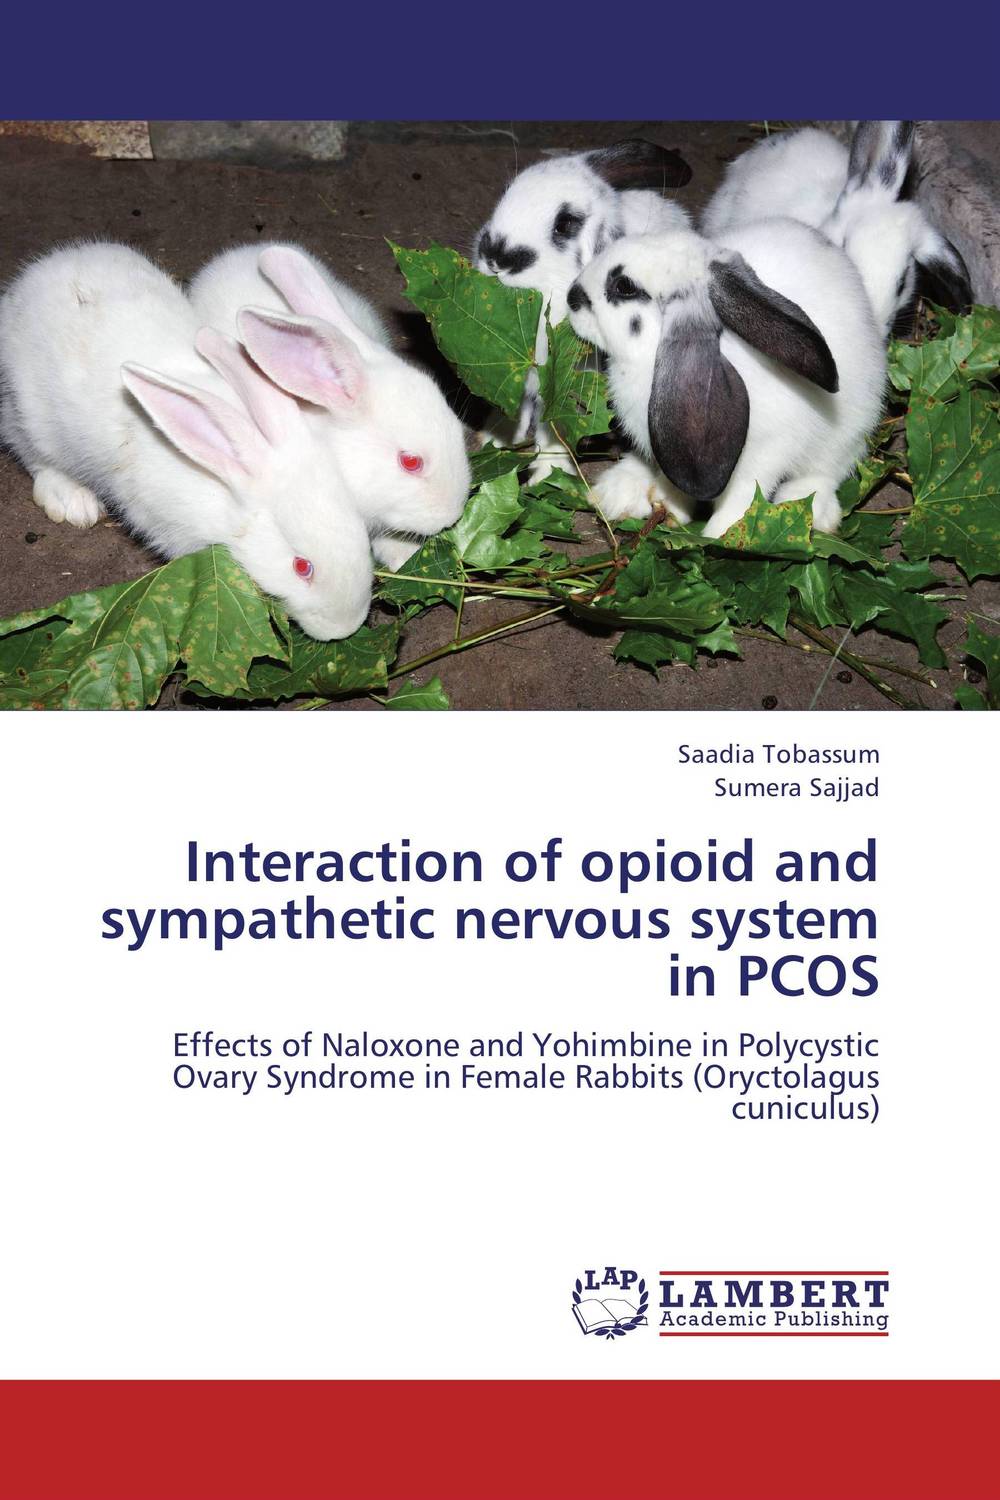 Interaction of opioid and sympathetic nervous system in PCOS